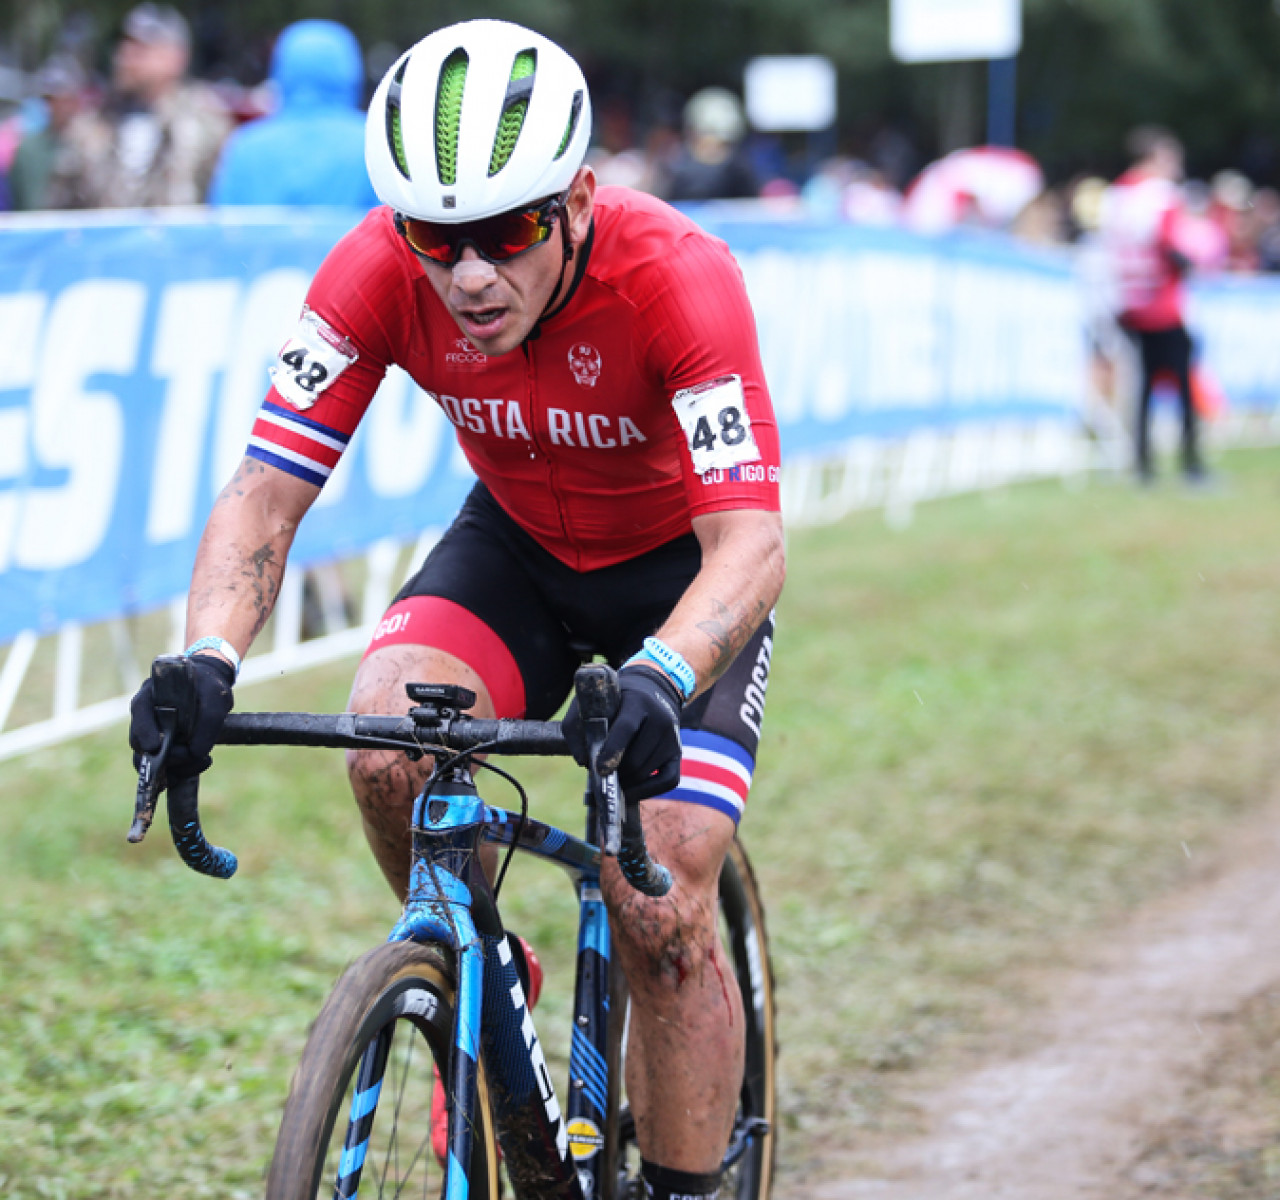 Cyclocrossrider | Cyclocross news and info